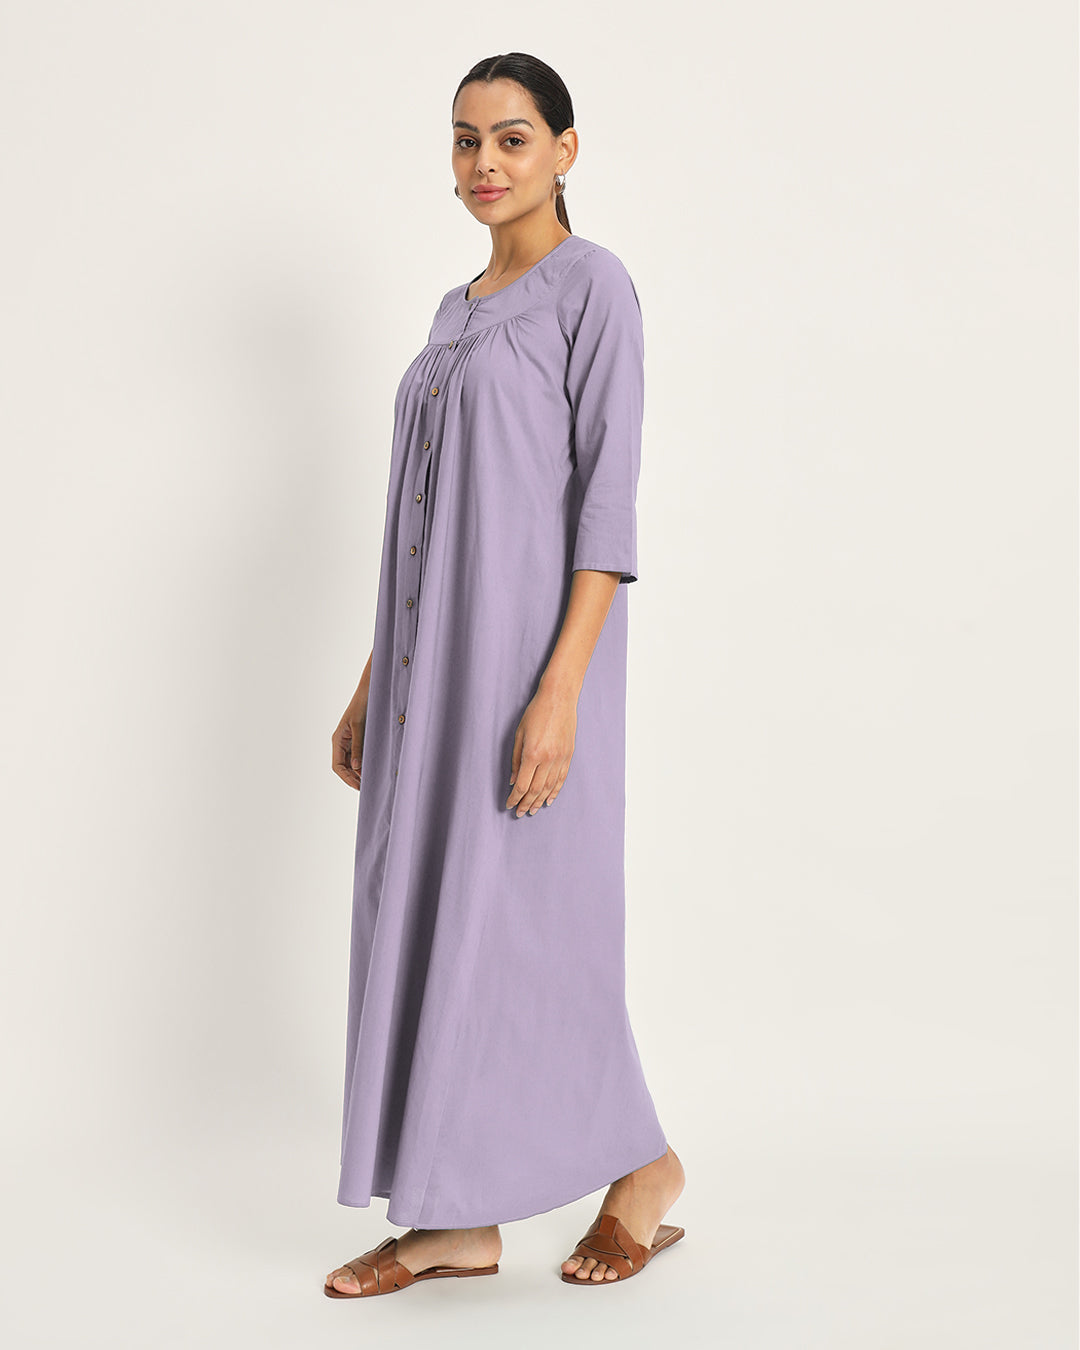 Combo: Lilac & Sage Green Nighttime Must-Have Nightdress